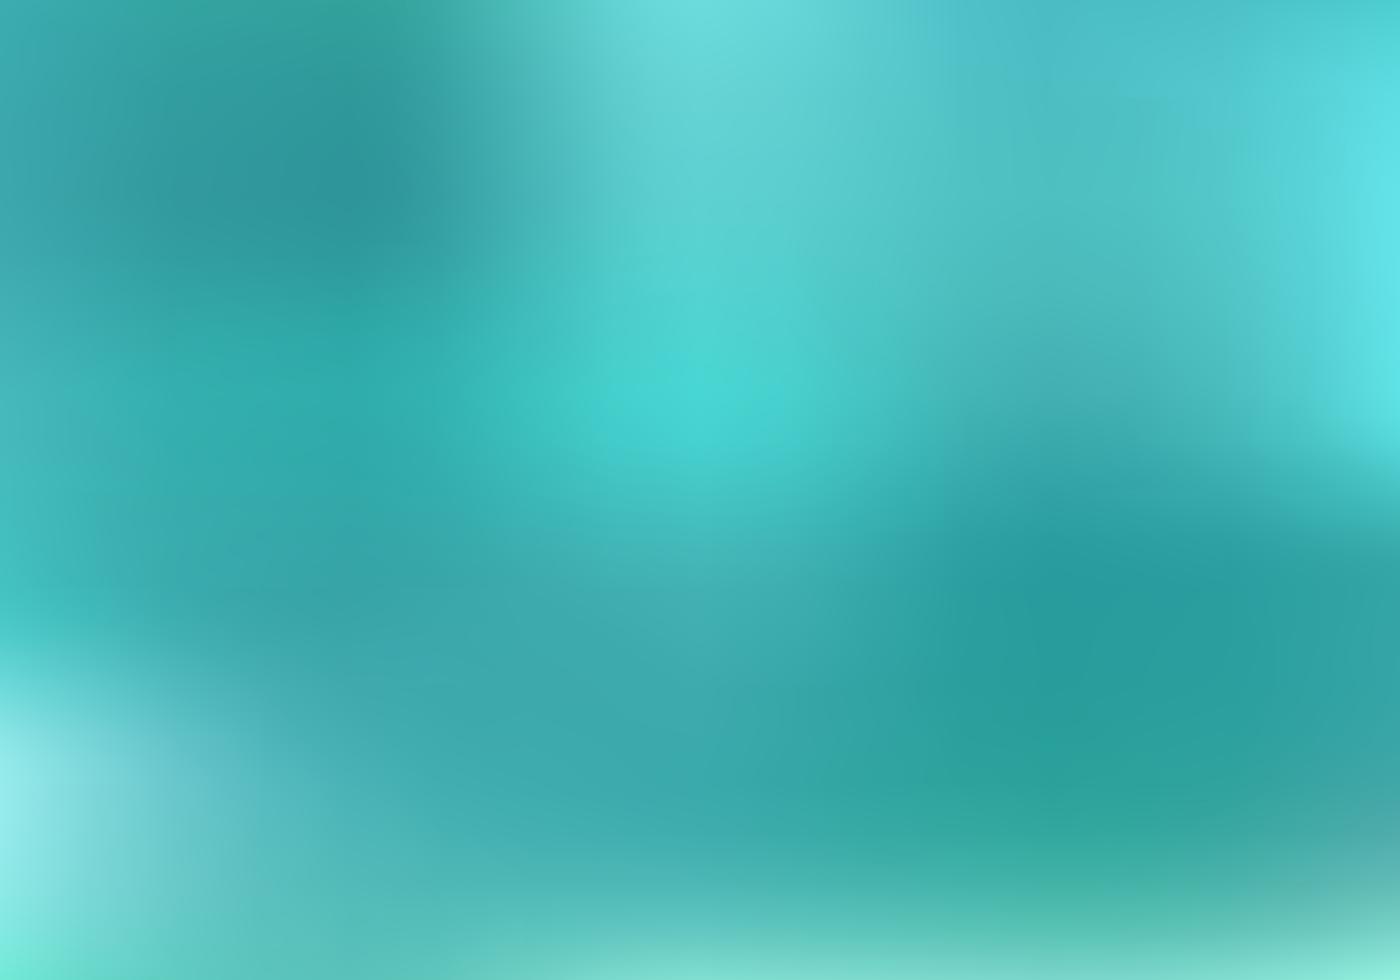 Abstract blurred gradient turquoise background. 547778 - Download Free ...